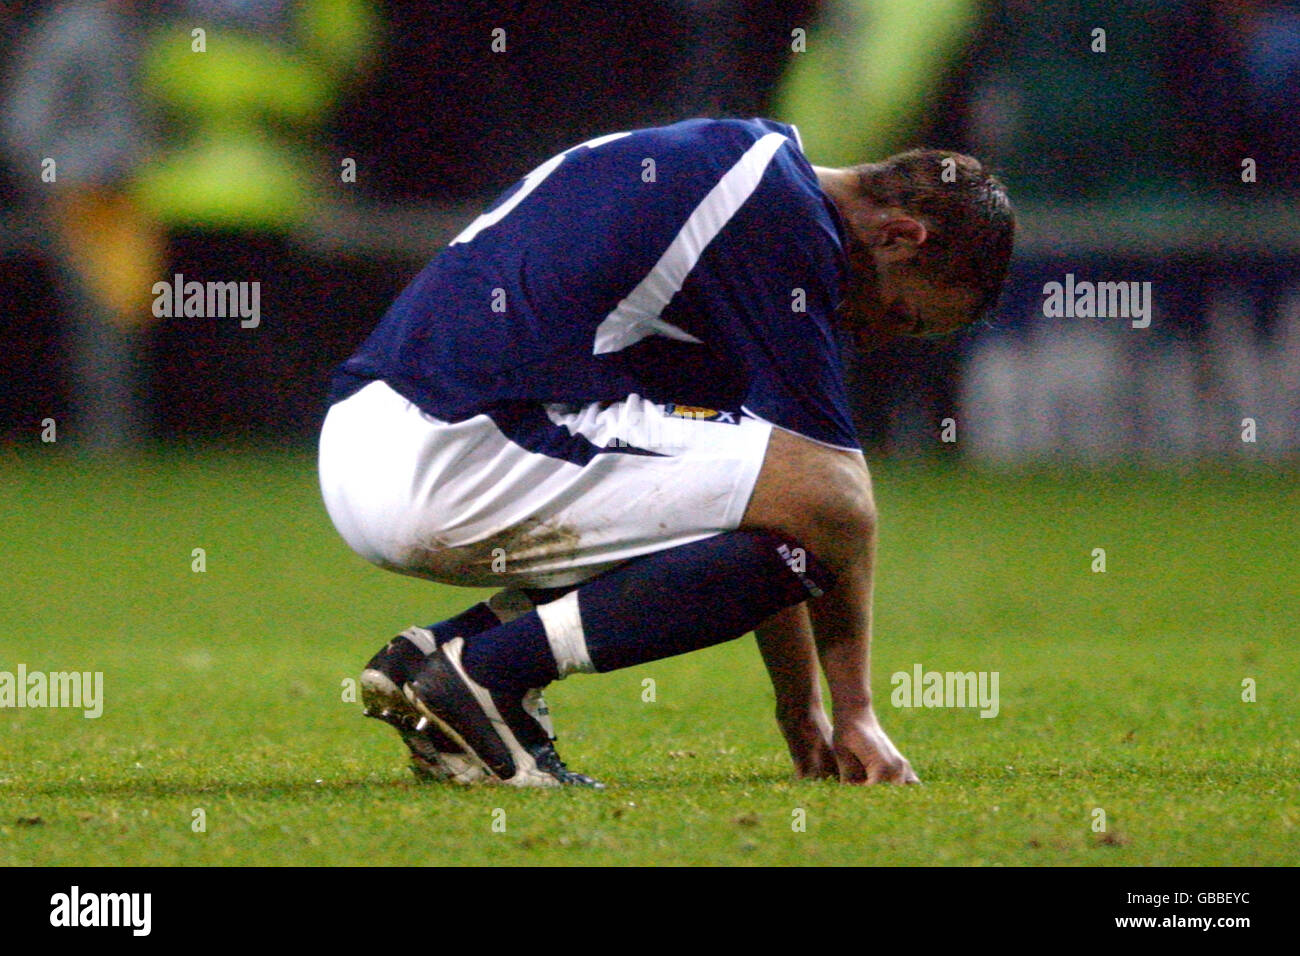 Soccer - European Under 21 Championships 2004 Play Off - Second Leg - Scotland v Croatia. A dejected John Kennedy of Scotland after blazing the ball over the bar Stock Photo